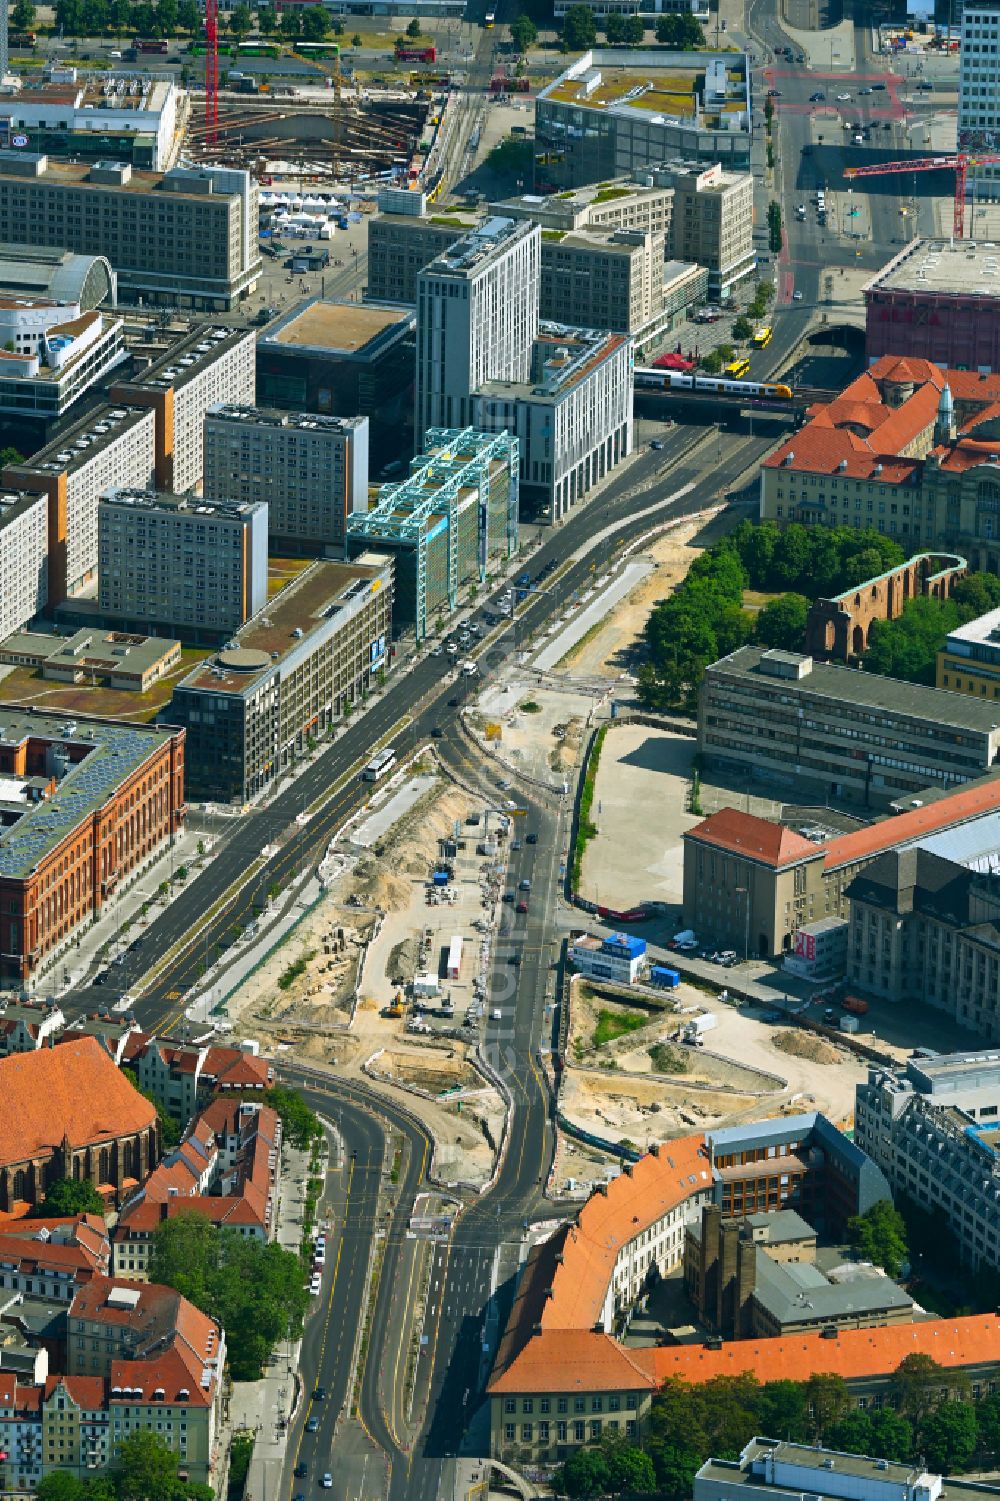 Aerial image Berlin - Construction site with development works and embankments works as part of the reconstruction project on Molkenmarkt overlooking Rotes Rathaus along the Grunerstrasse in the district Mitte in Berlin, Germany